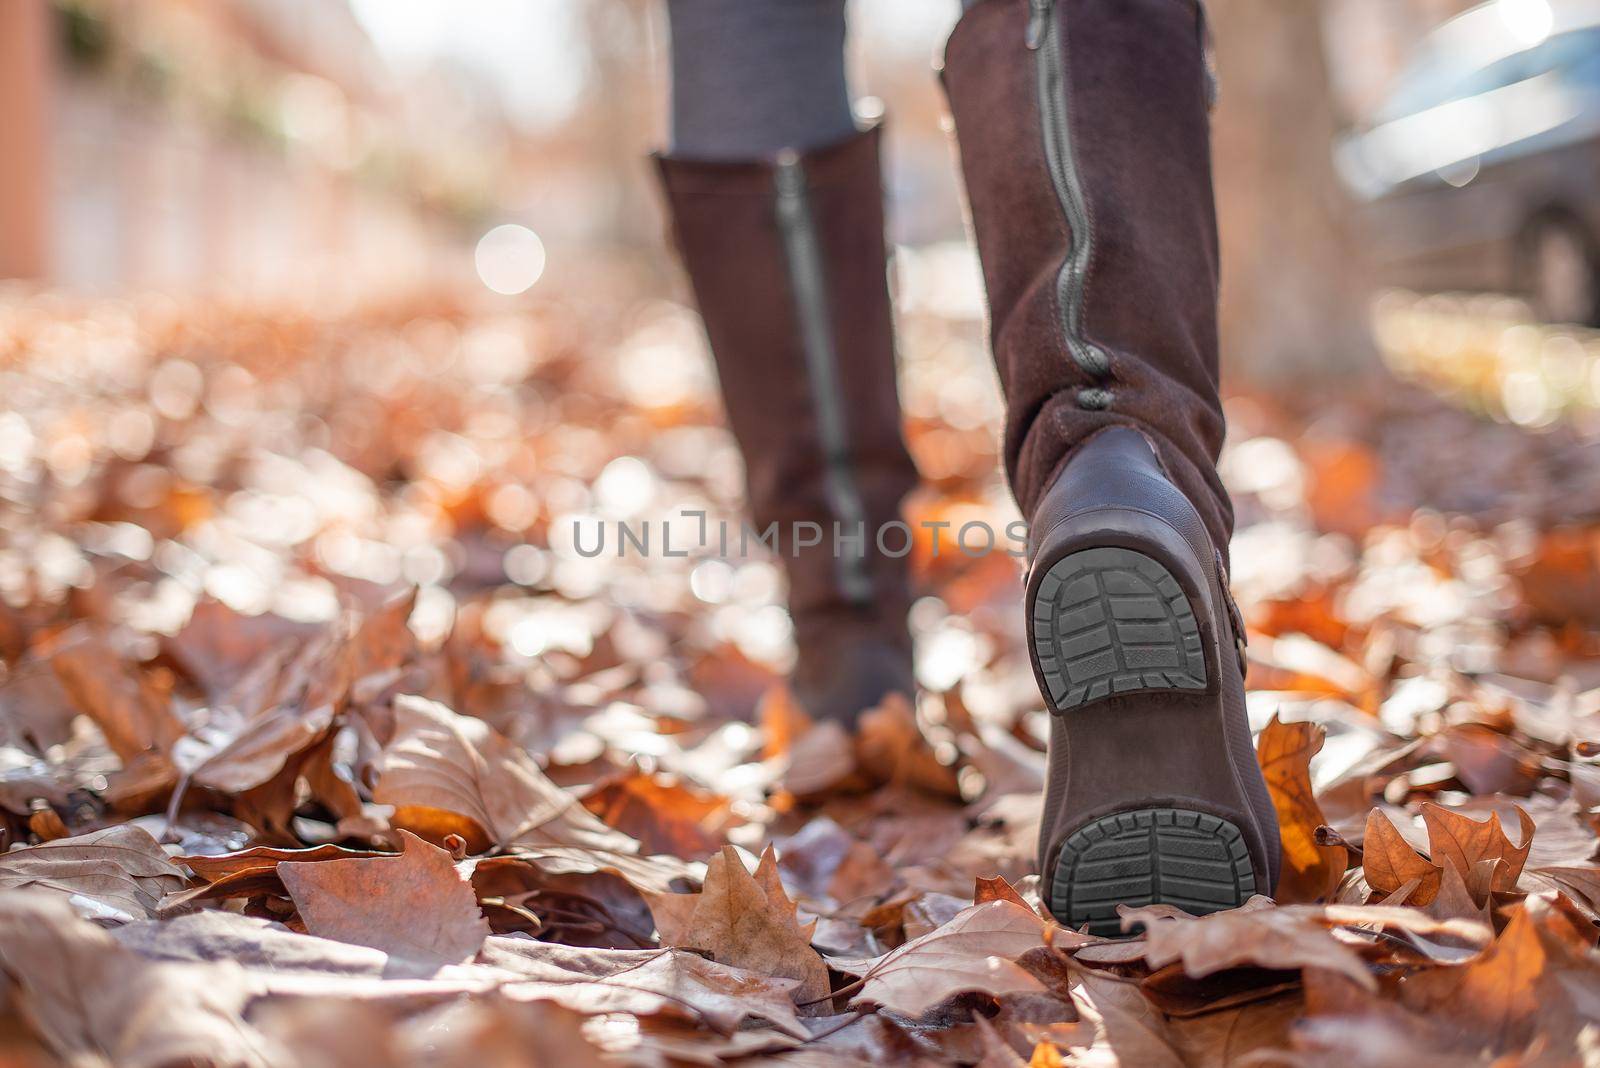 Close up view of a woman's boots walking through the fallen leaves in the street in autumn